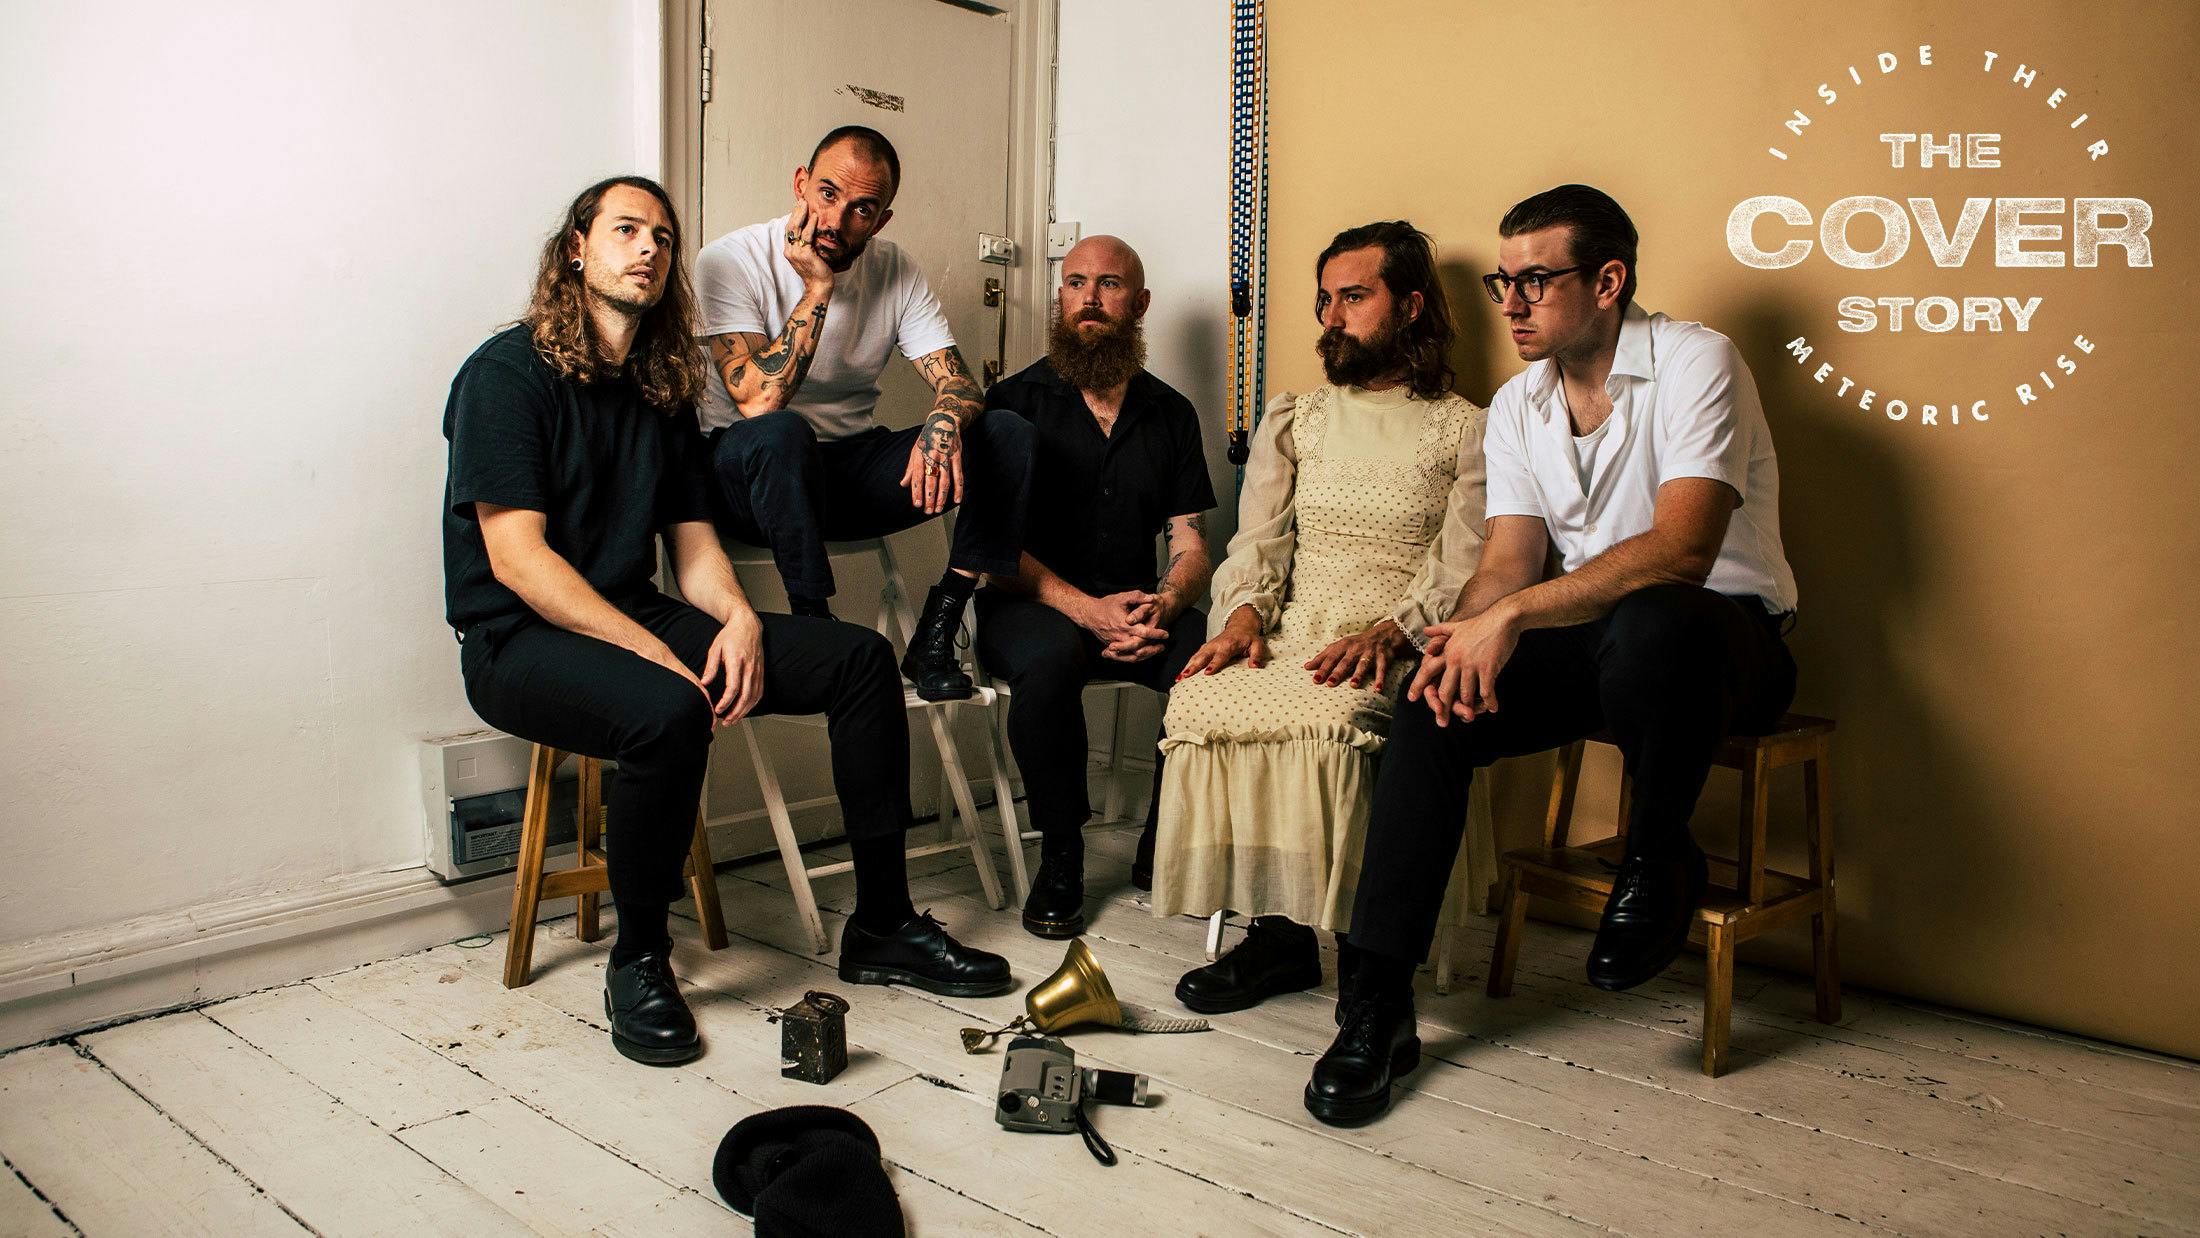 IDLES: The rise and rise of Britain's unlikely rock heroes